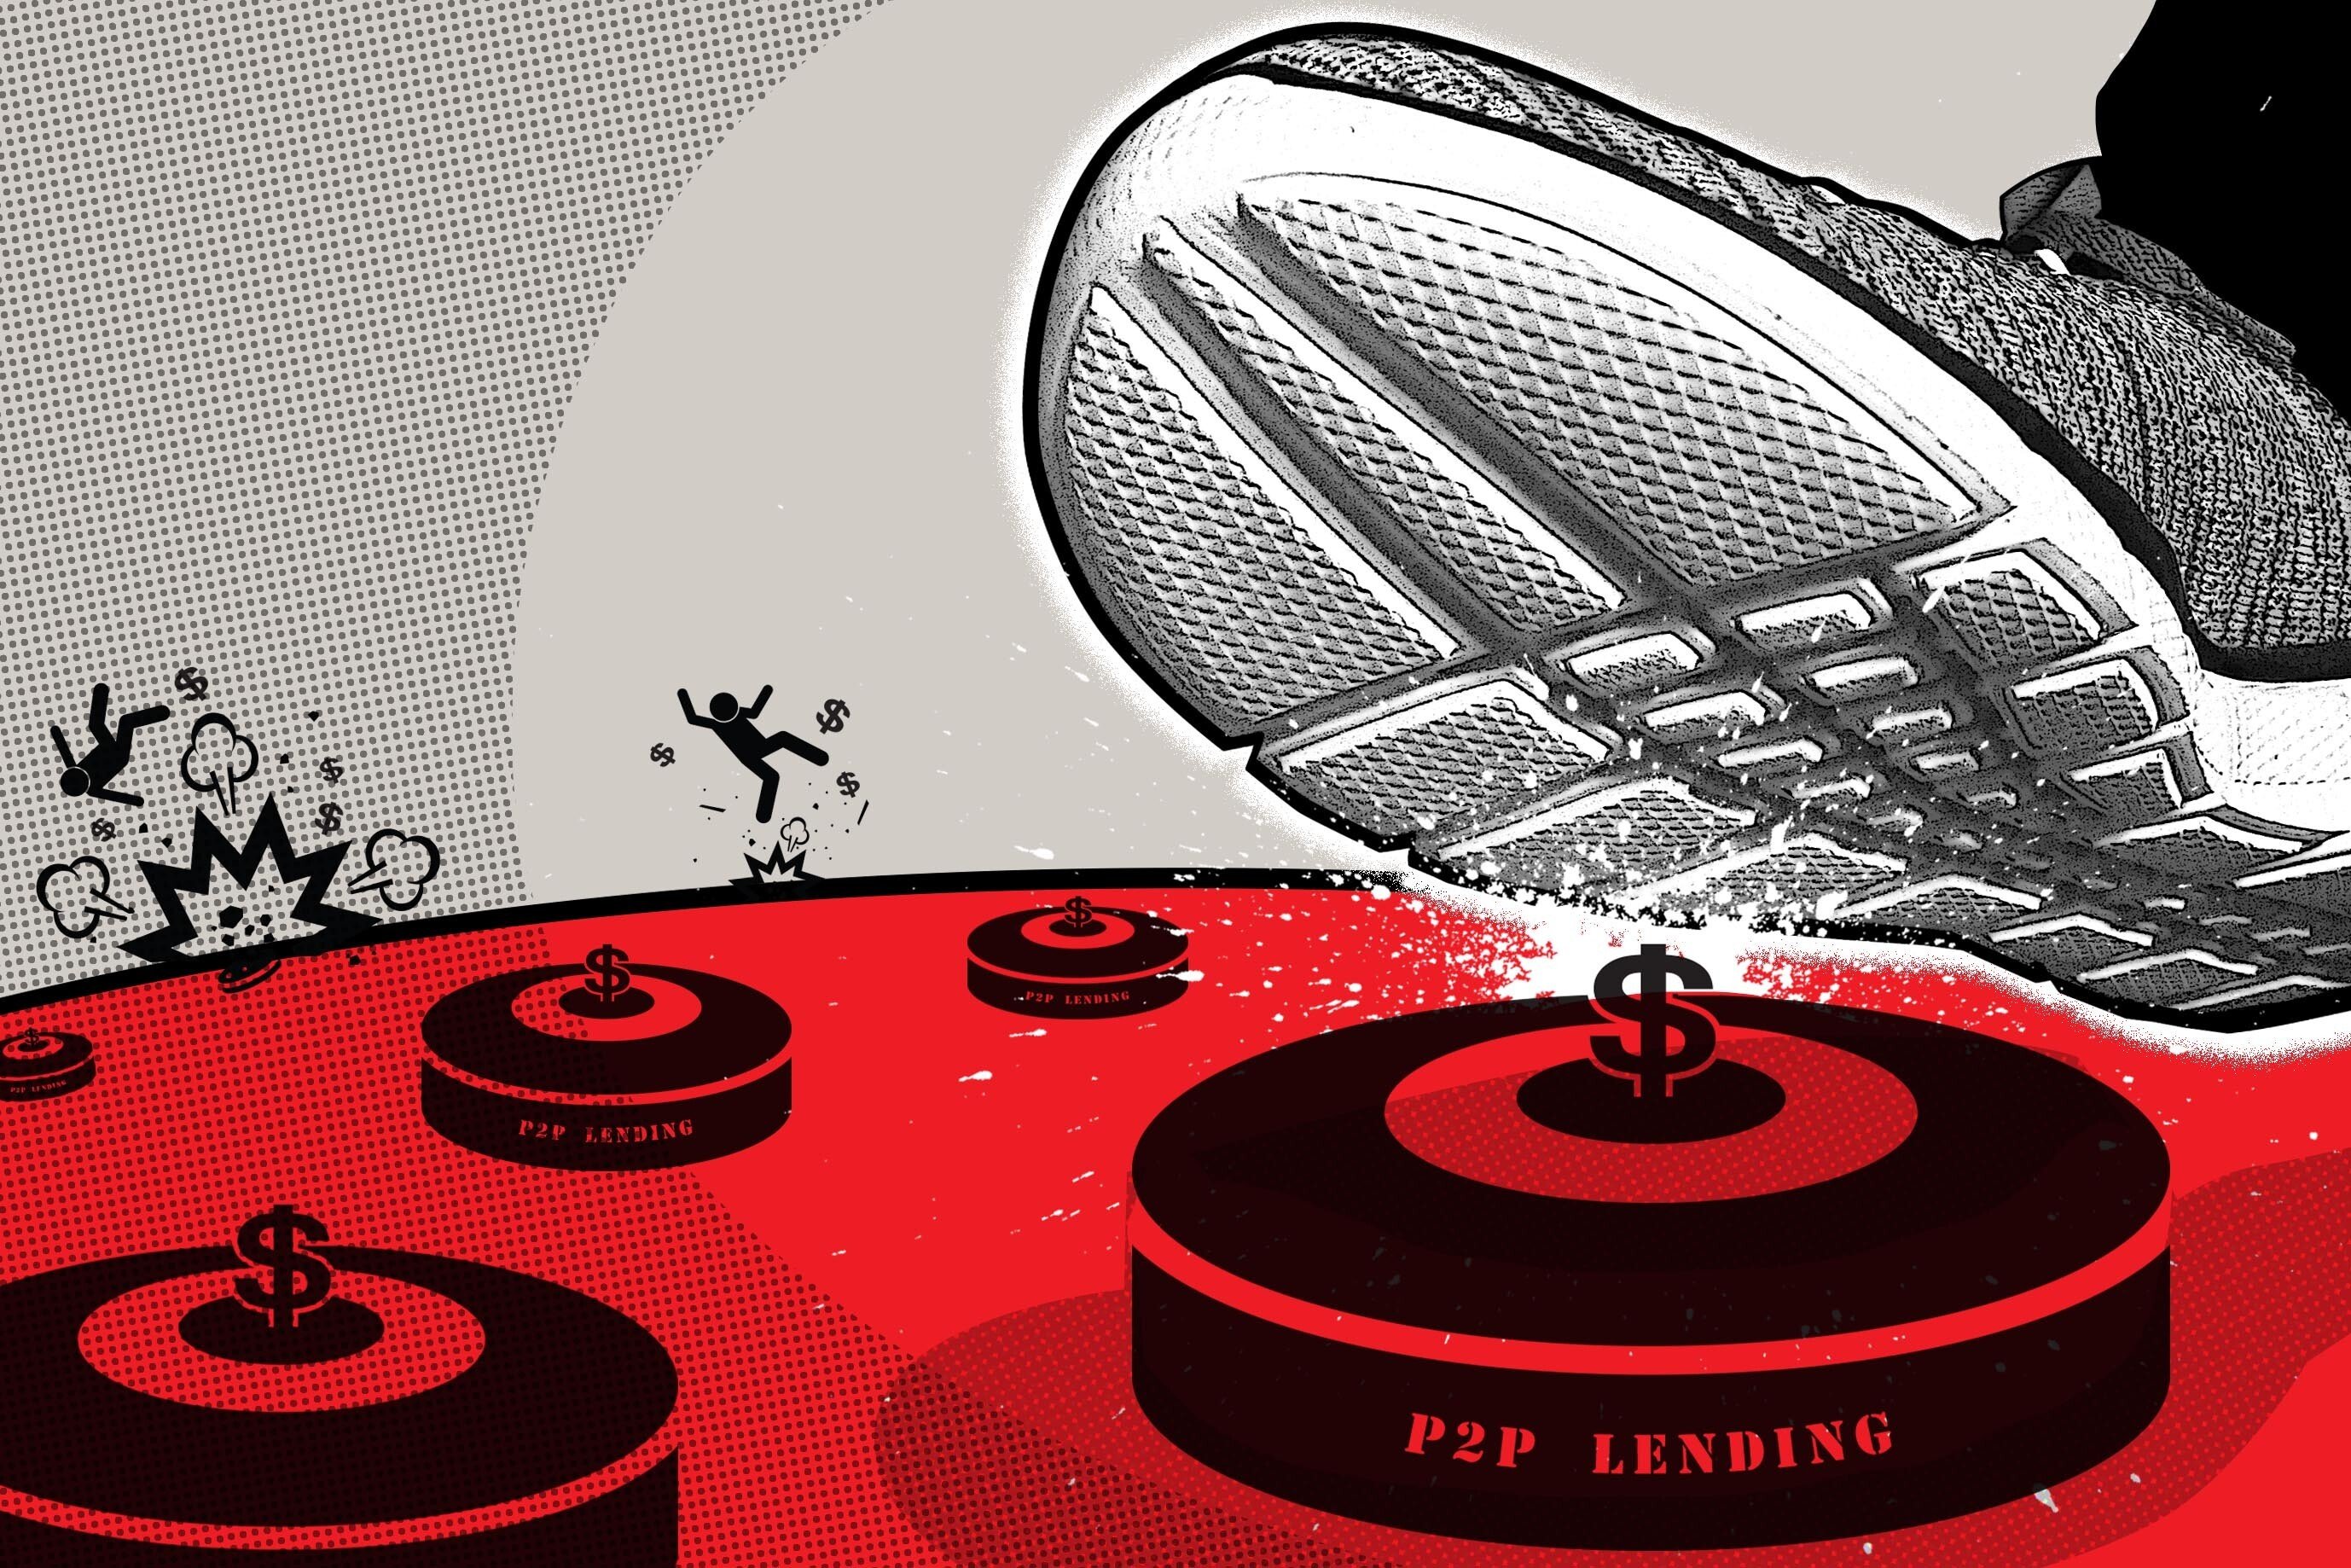 China’s scandal-plagued peer-to-peer (P2P) lending industry has virtually disappeared, but tens of millions of Chinese investors are still owed money. Illustration: Henry Wong